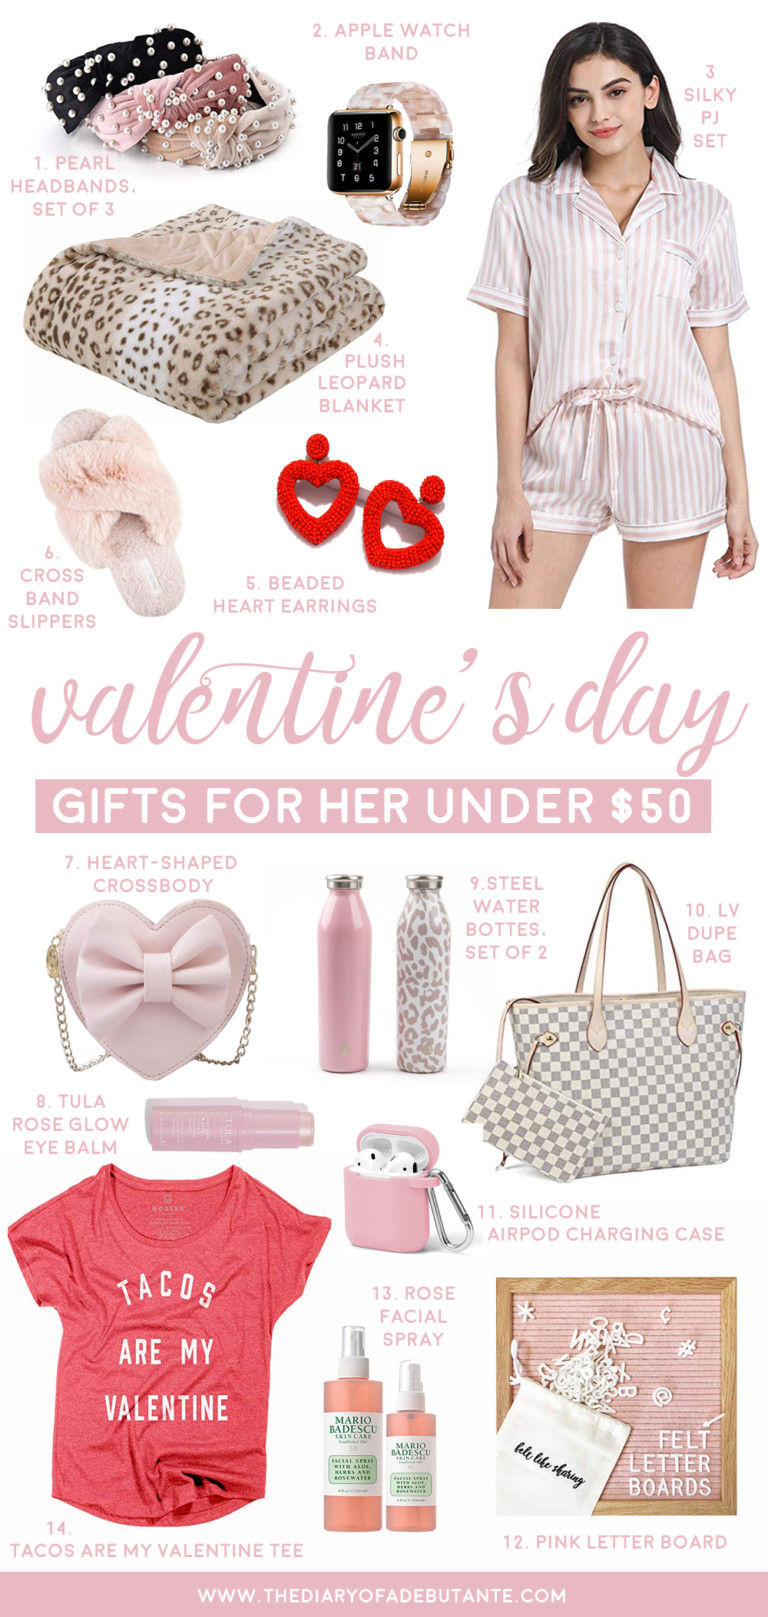 Girlfriend Gift Ideas Under $50
 Valentine s Day Gift Ideas for Your Girlfriend or Wife